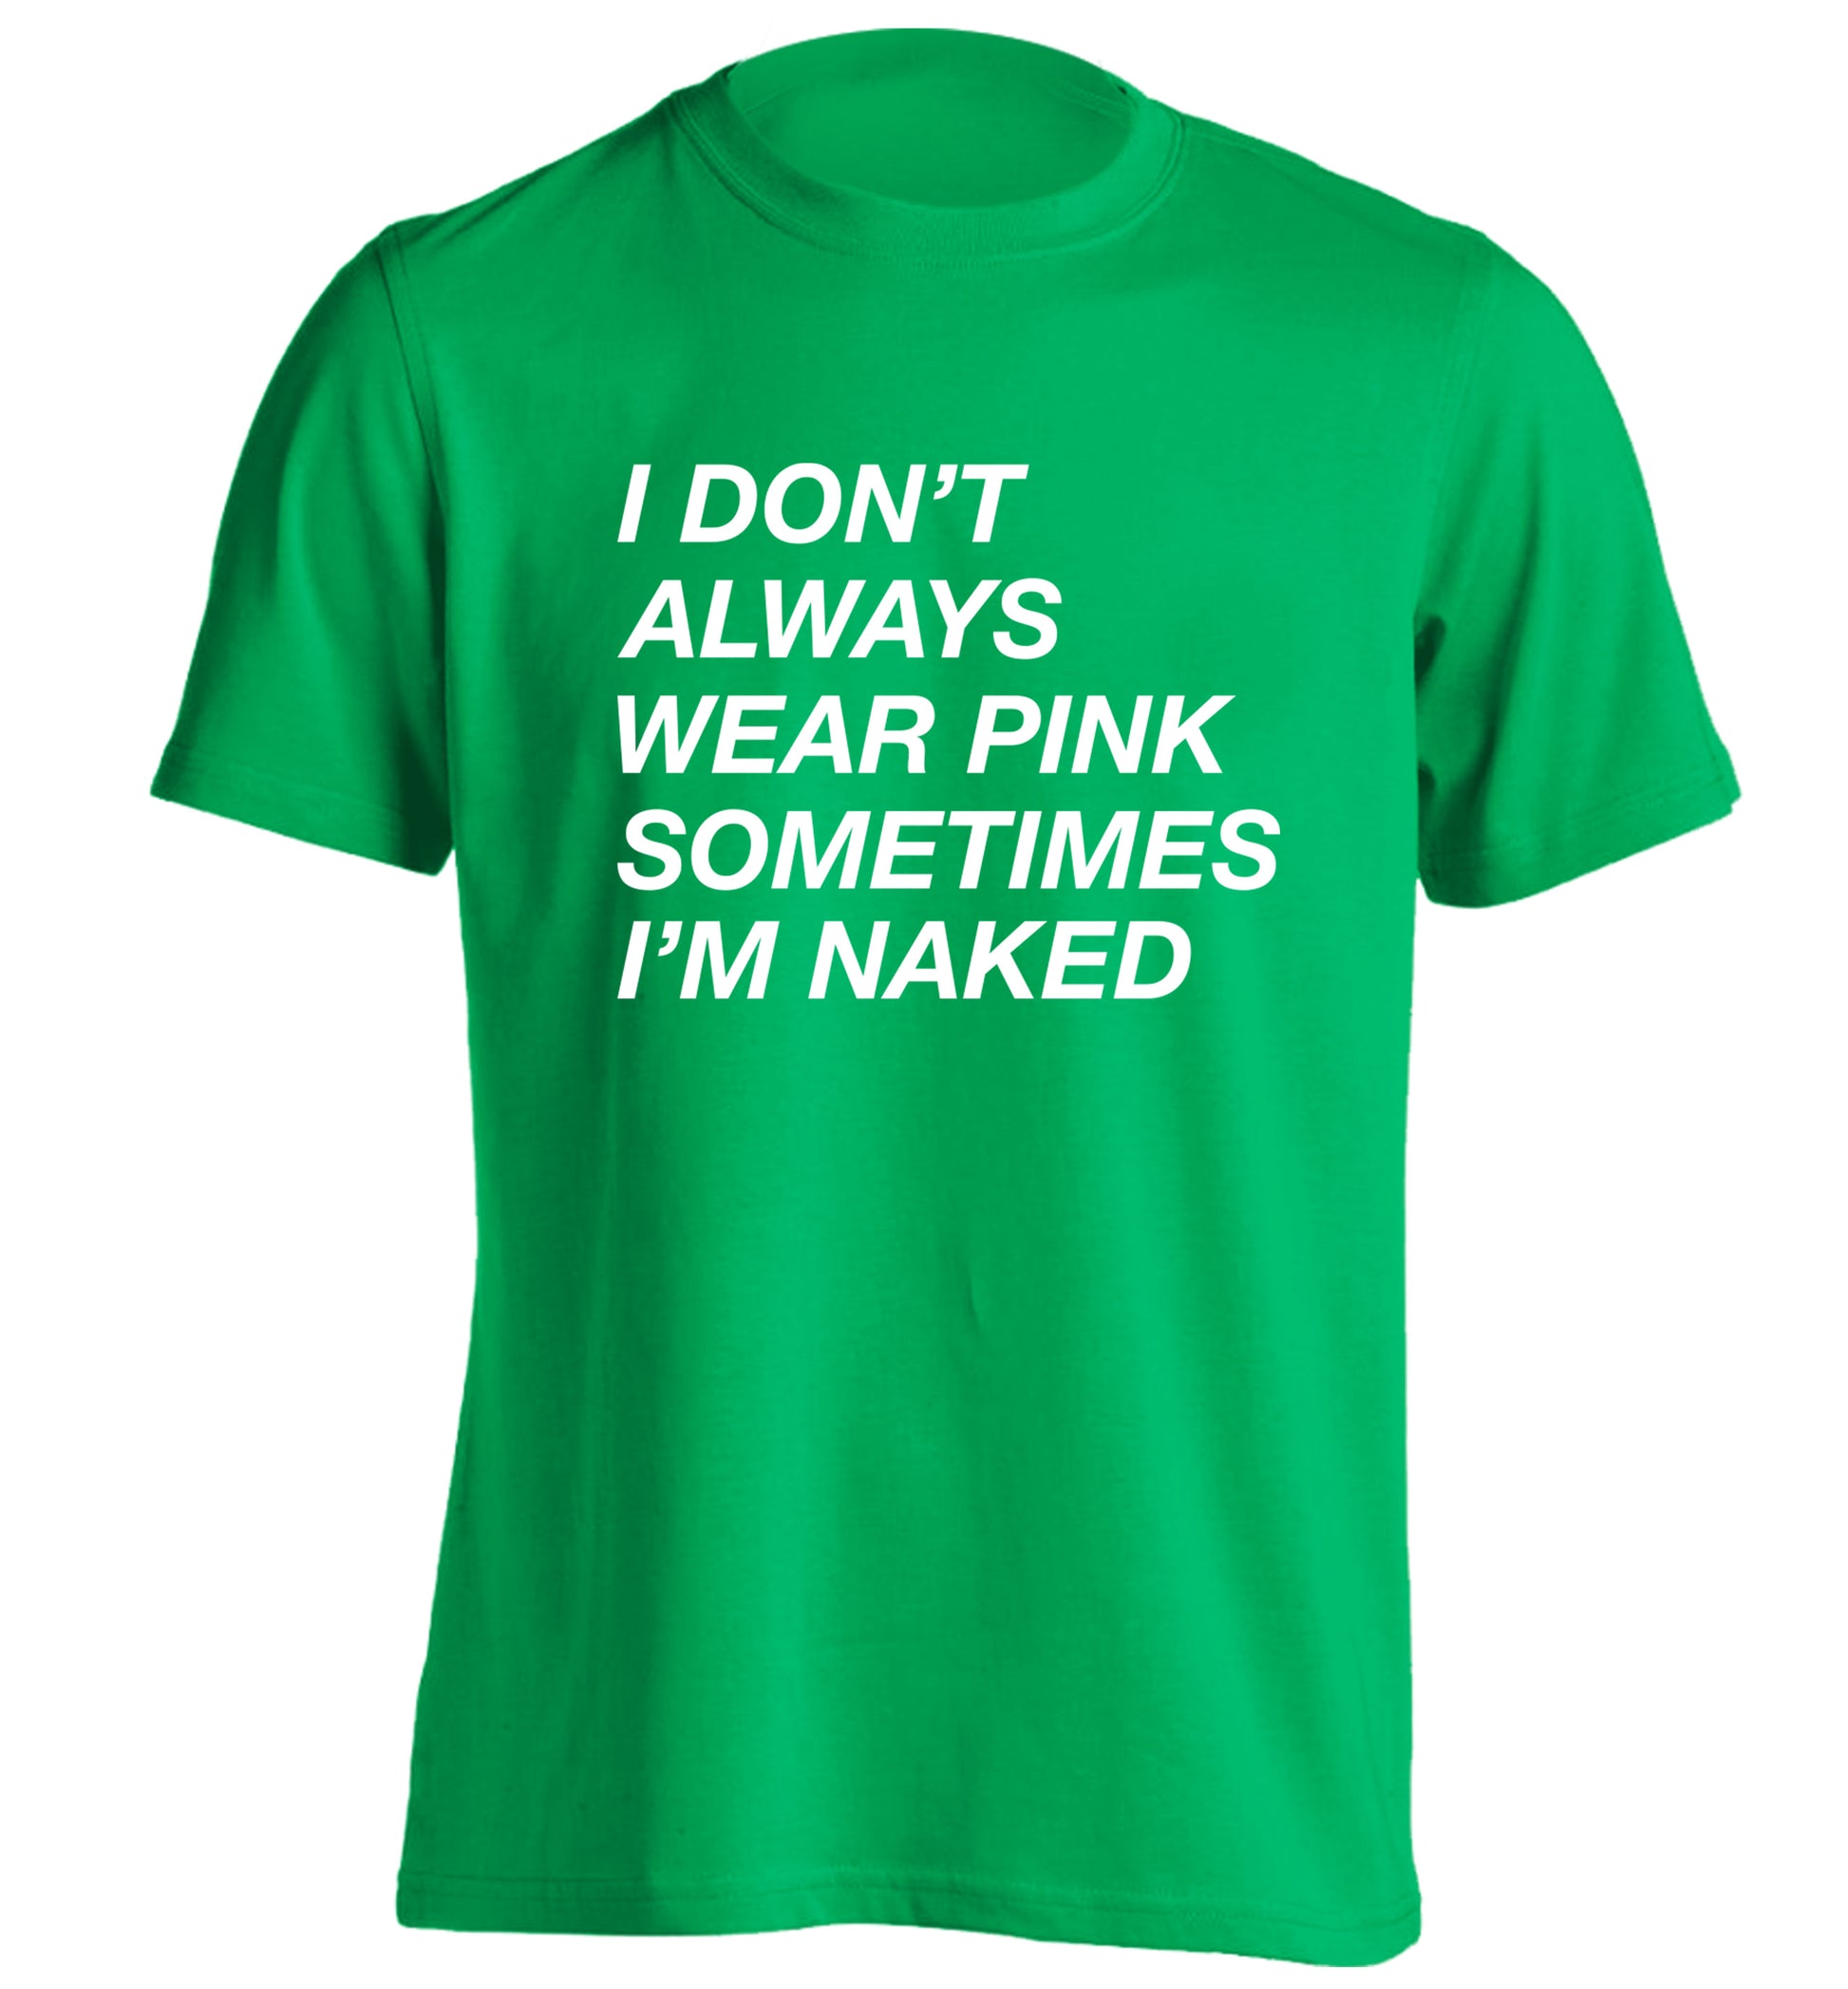 I don't always wear pink sometimes I'm naked adults unisex green Tshirt 2XL